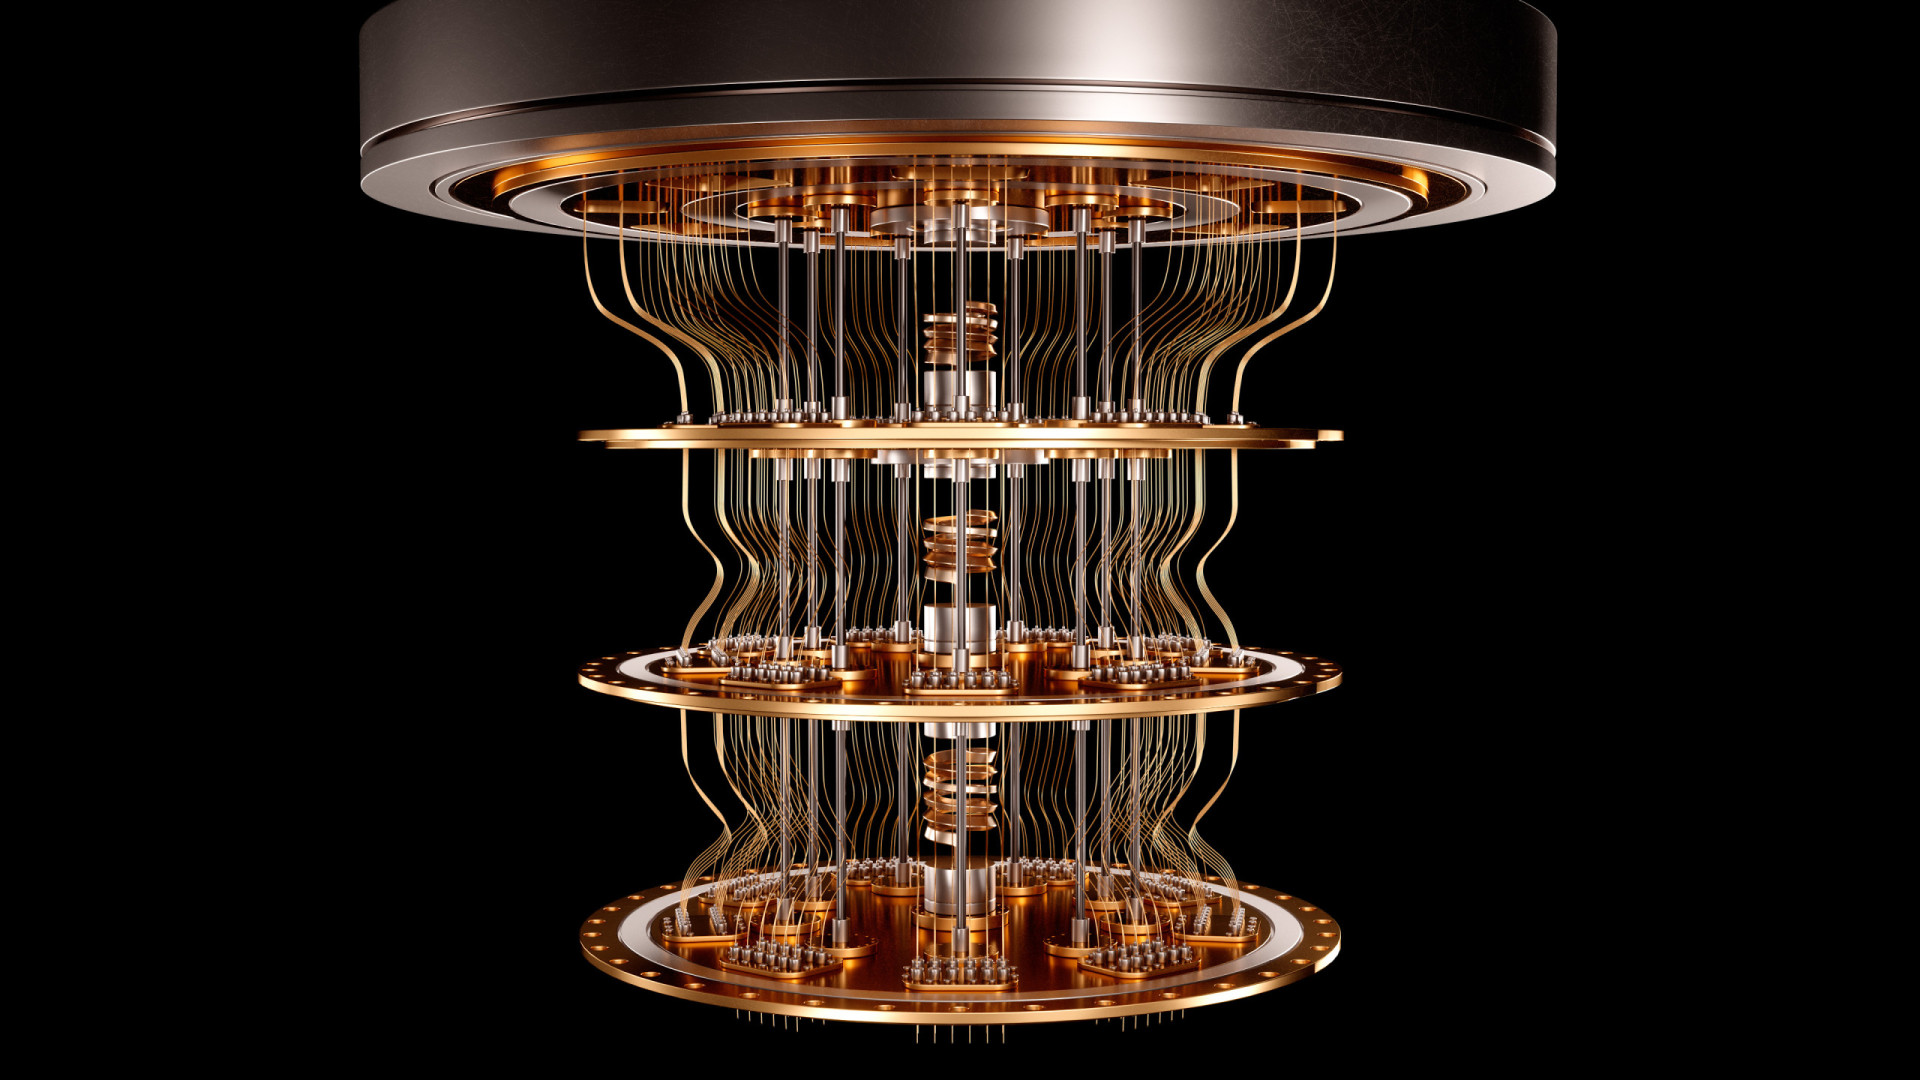 <p>Quantum computing leverages quantum bits or qubits to perform complex computations. It holds the potential to revolutionize fields like cryptography, optimization, and drug discovery by solving problems at unprecedented speeds.</p><p>You may also like:<a href="https://www.starsinsider.com/n/235884?utm_source=msn.com&utm_medium=display&utm_campaign=referral_description&utm_content=635781en-en"> Australia's mythical creatures</a></p>